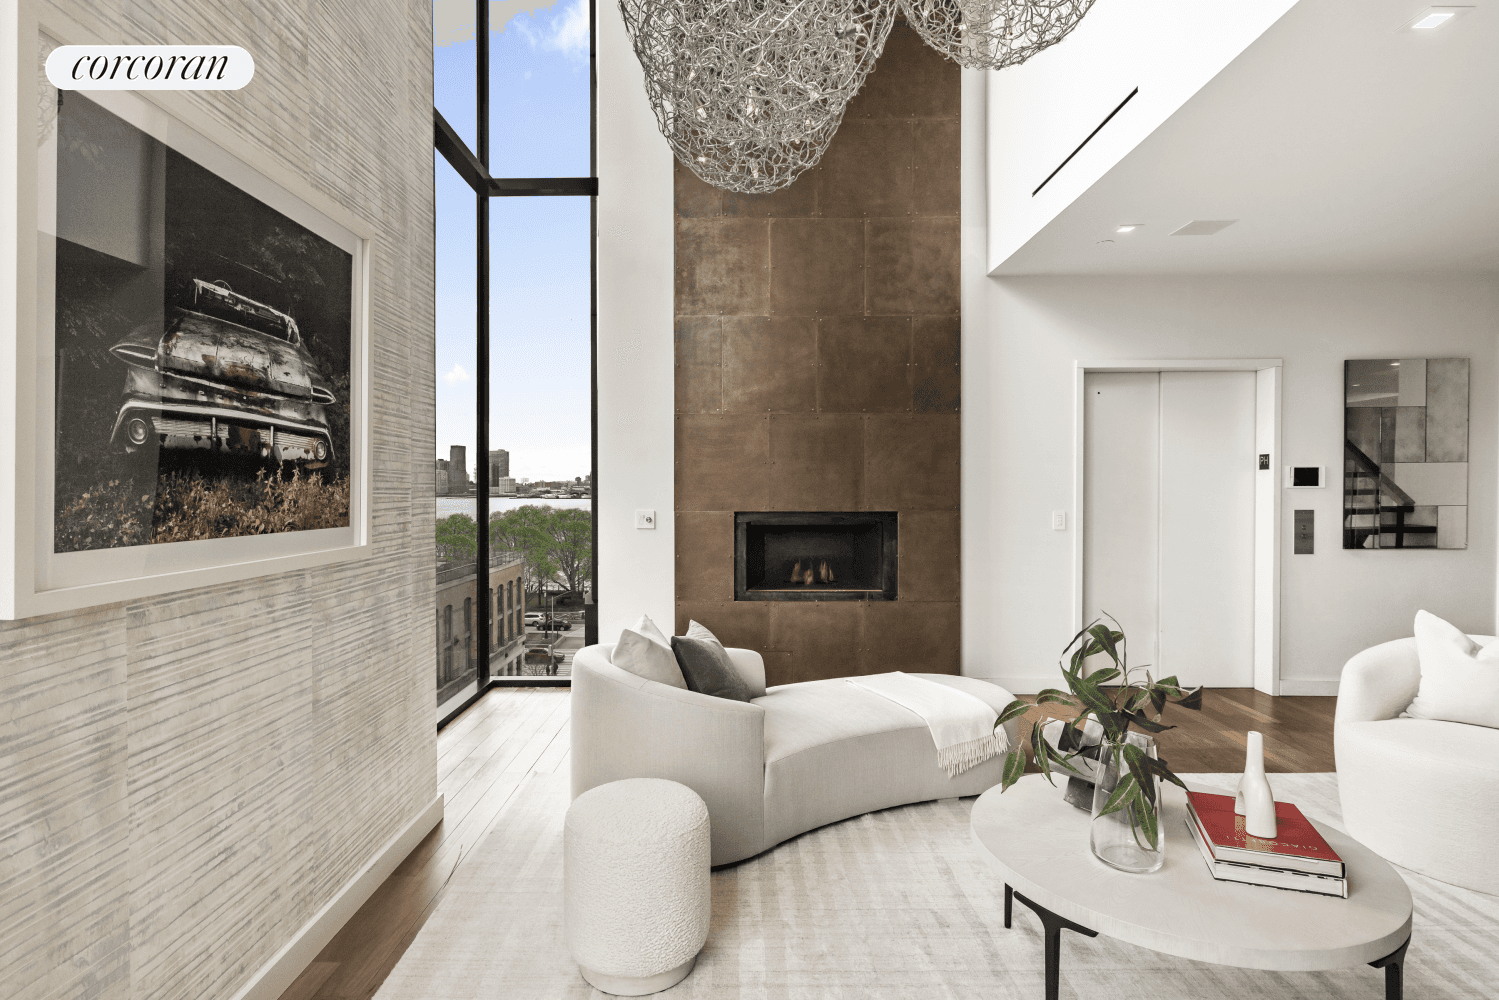 This incredible penthouse located on cobblestoned West 12th street in the West Village features four bedrooms, and four baths in this designer residence with beautifully crafted interiors, two levels of ...